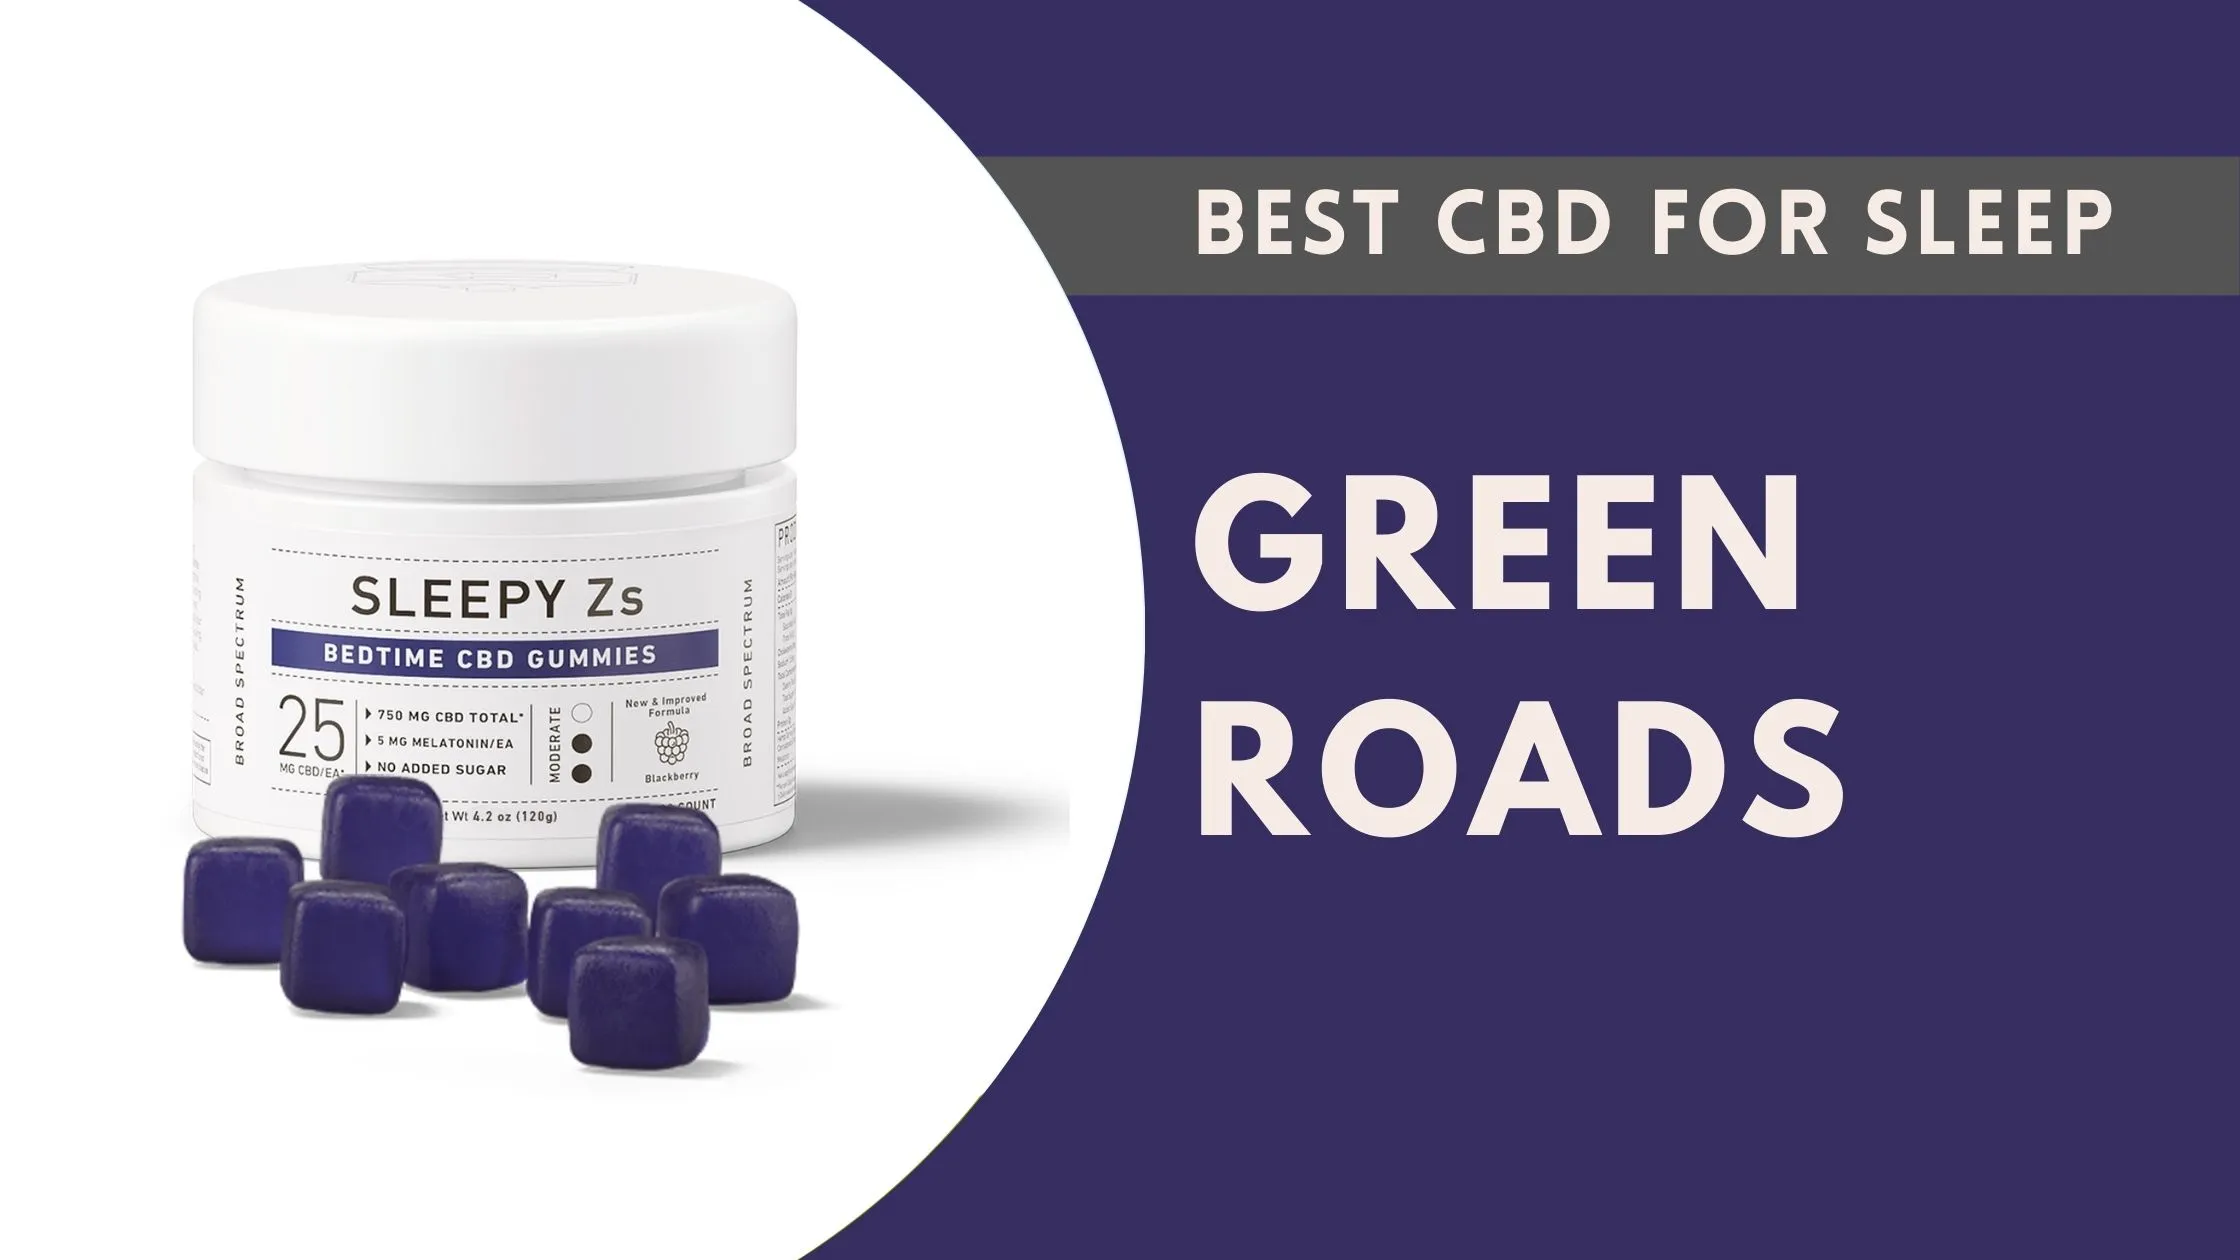 green roads cbd for sleep and relaxation